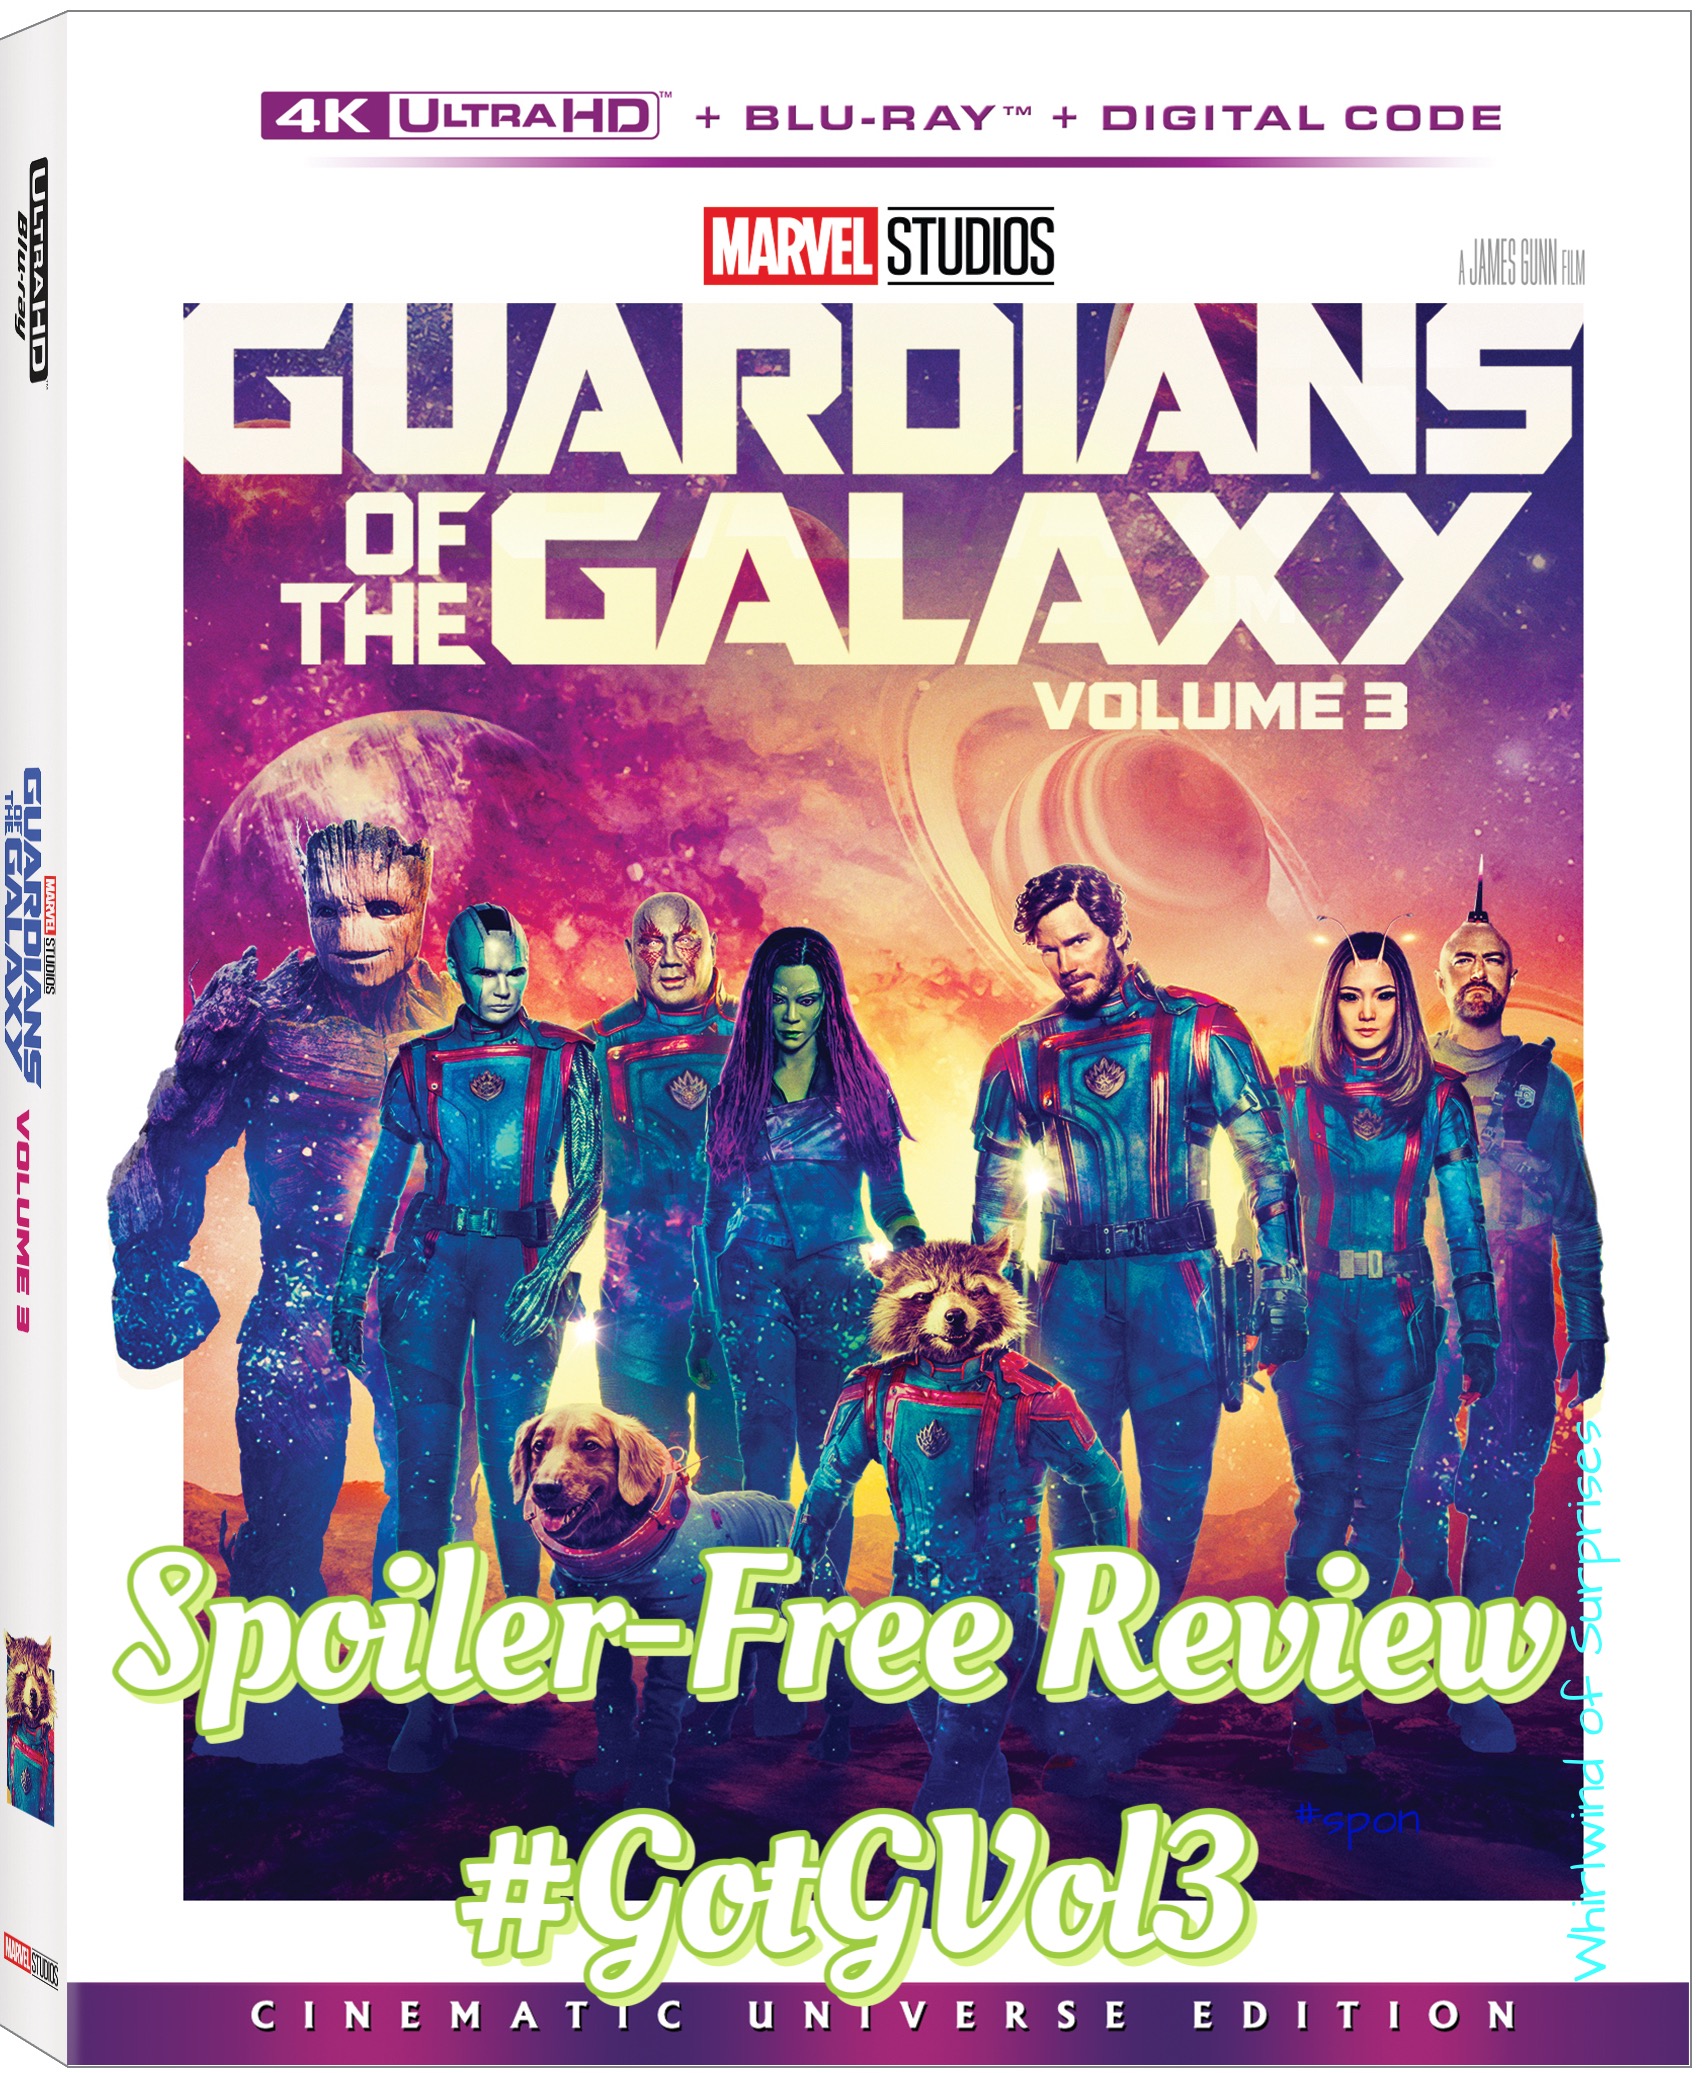 Spoiler-Free Review of Guardians of the Galaxy Vol 3